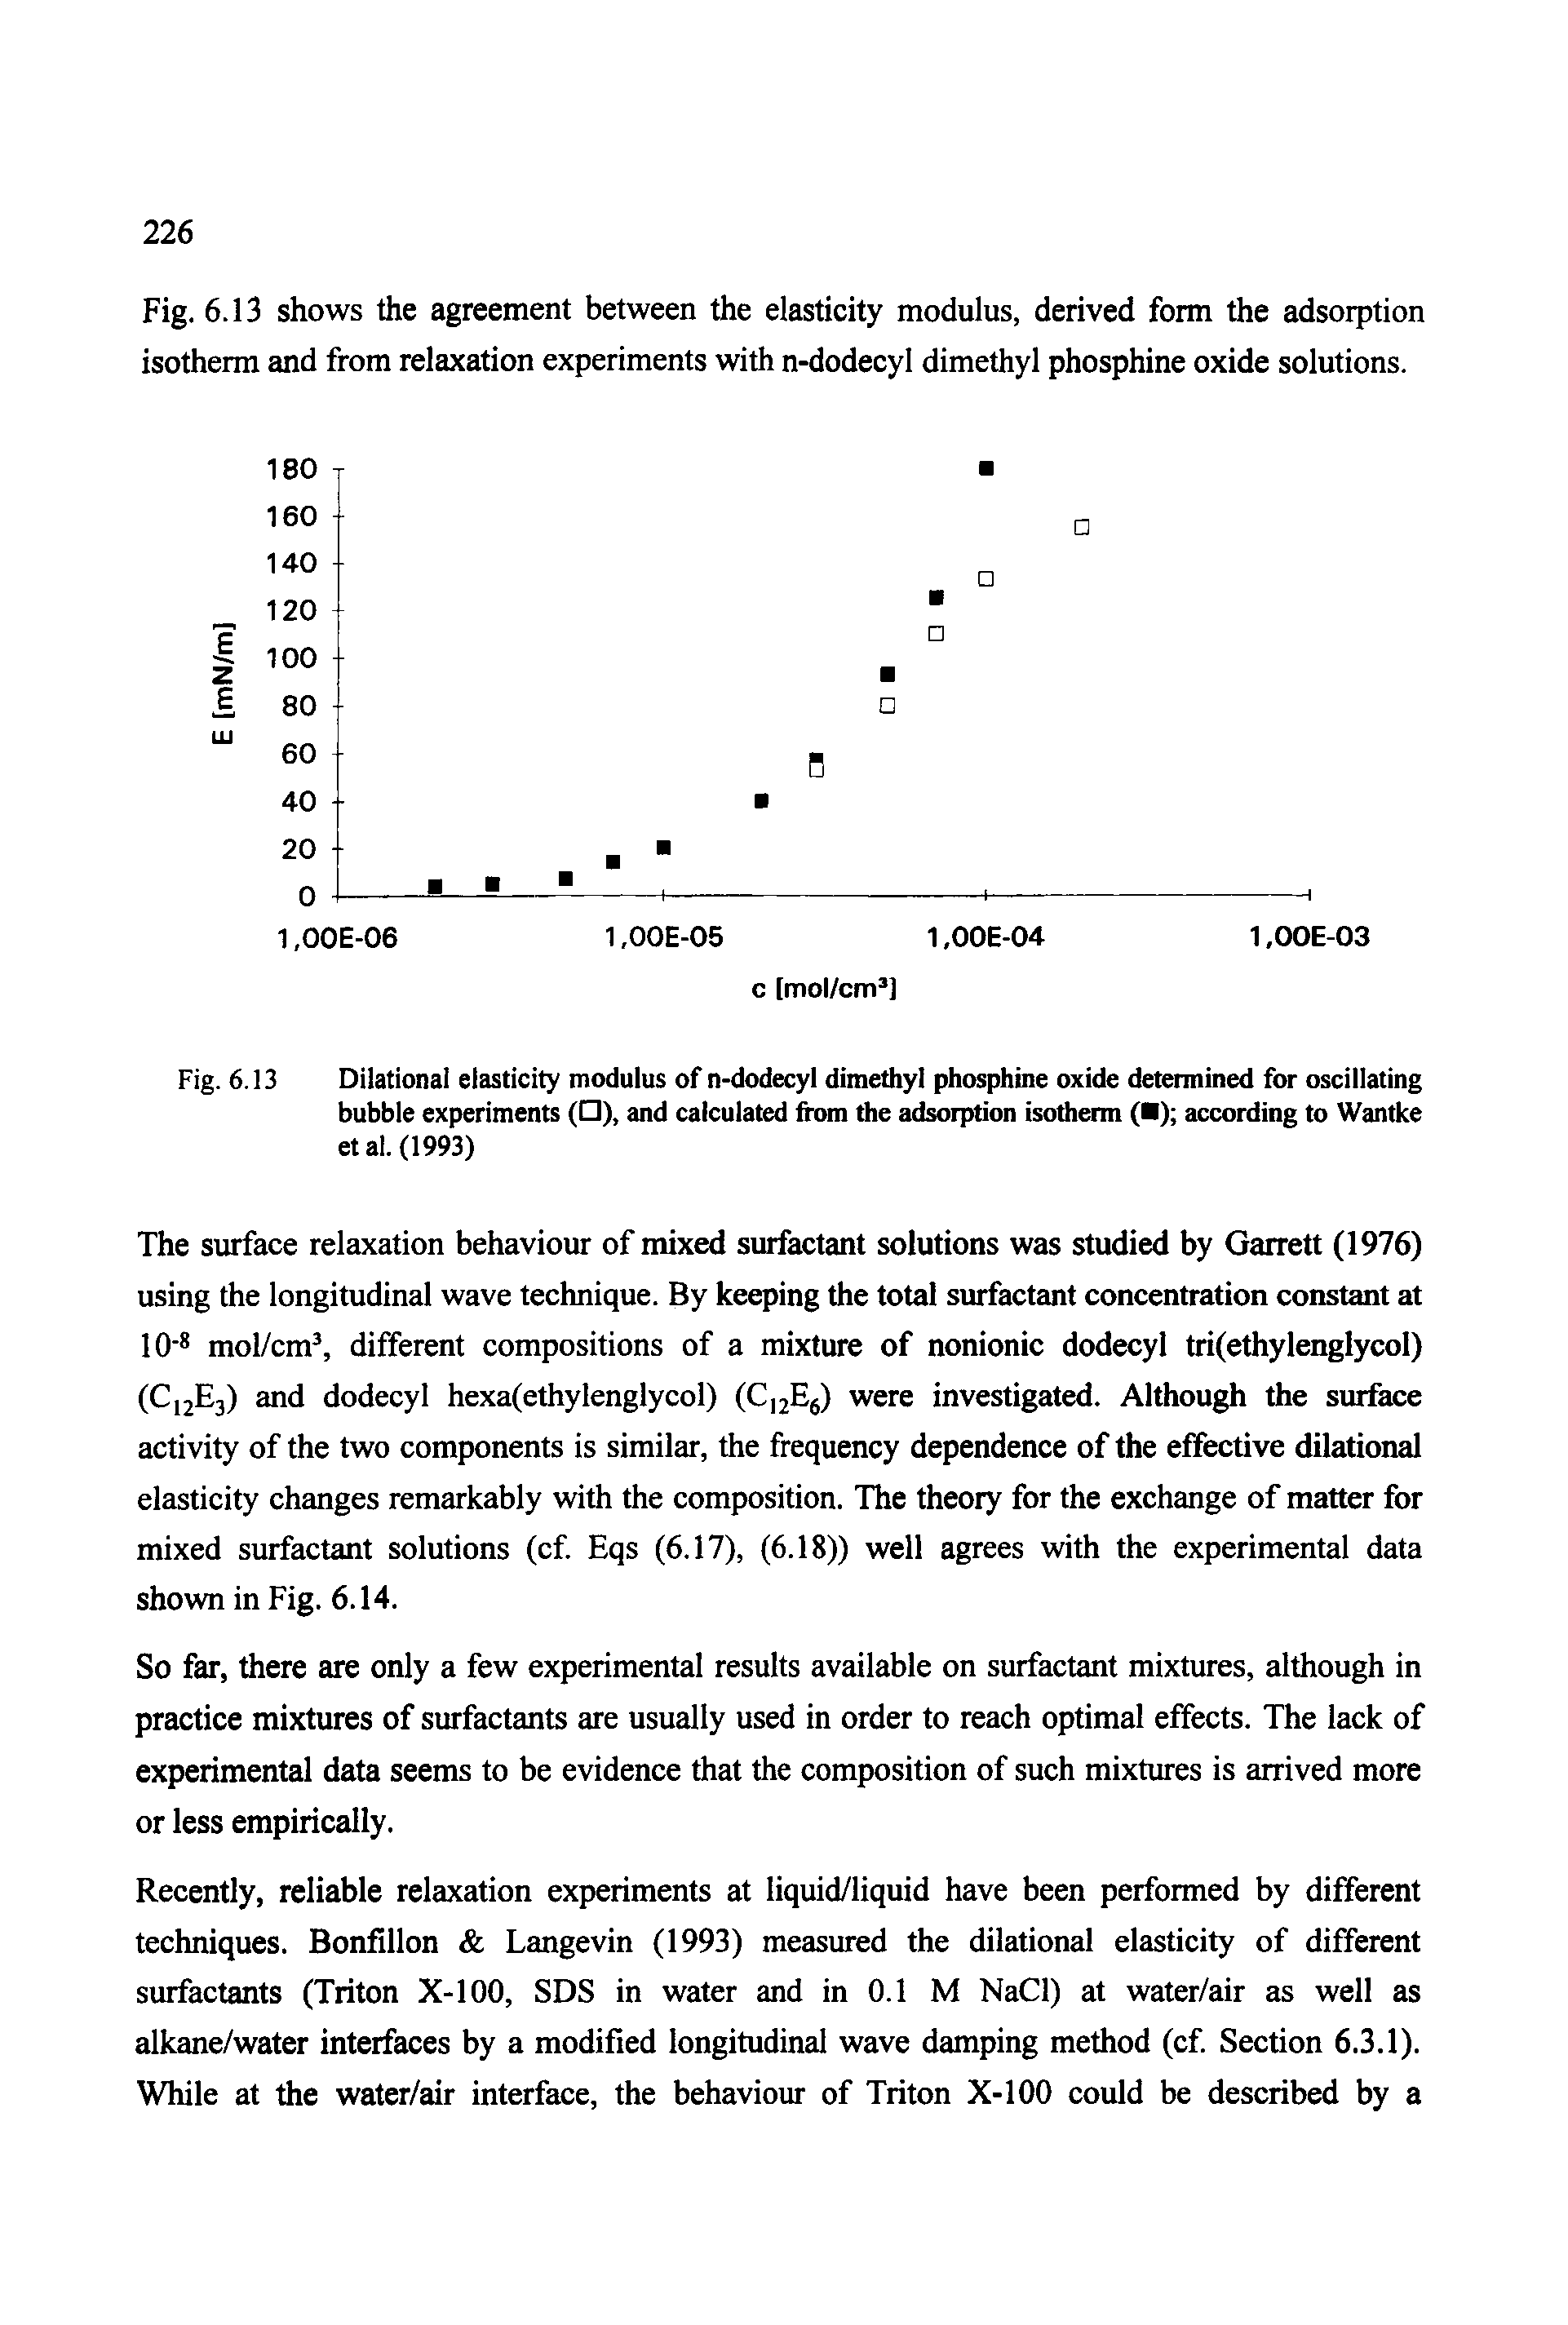 Fig. 6.13 Dilational elasticity modulus of n-dodecyl dimethyl phosphine oxide determined for oscillating bubble experiments ( ), and calculated from the adsorption isotherm ( ) according to Wantke etal.(1993)...